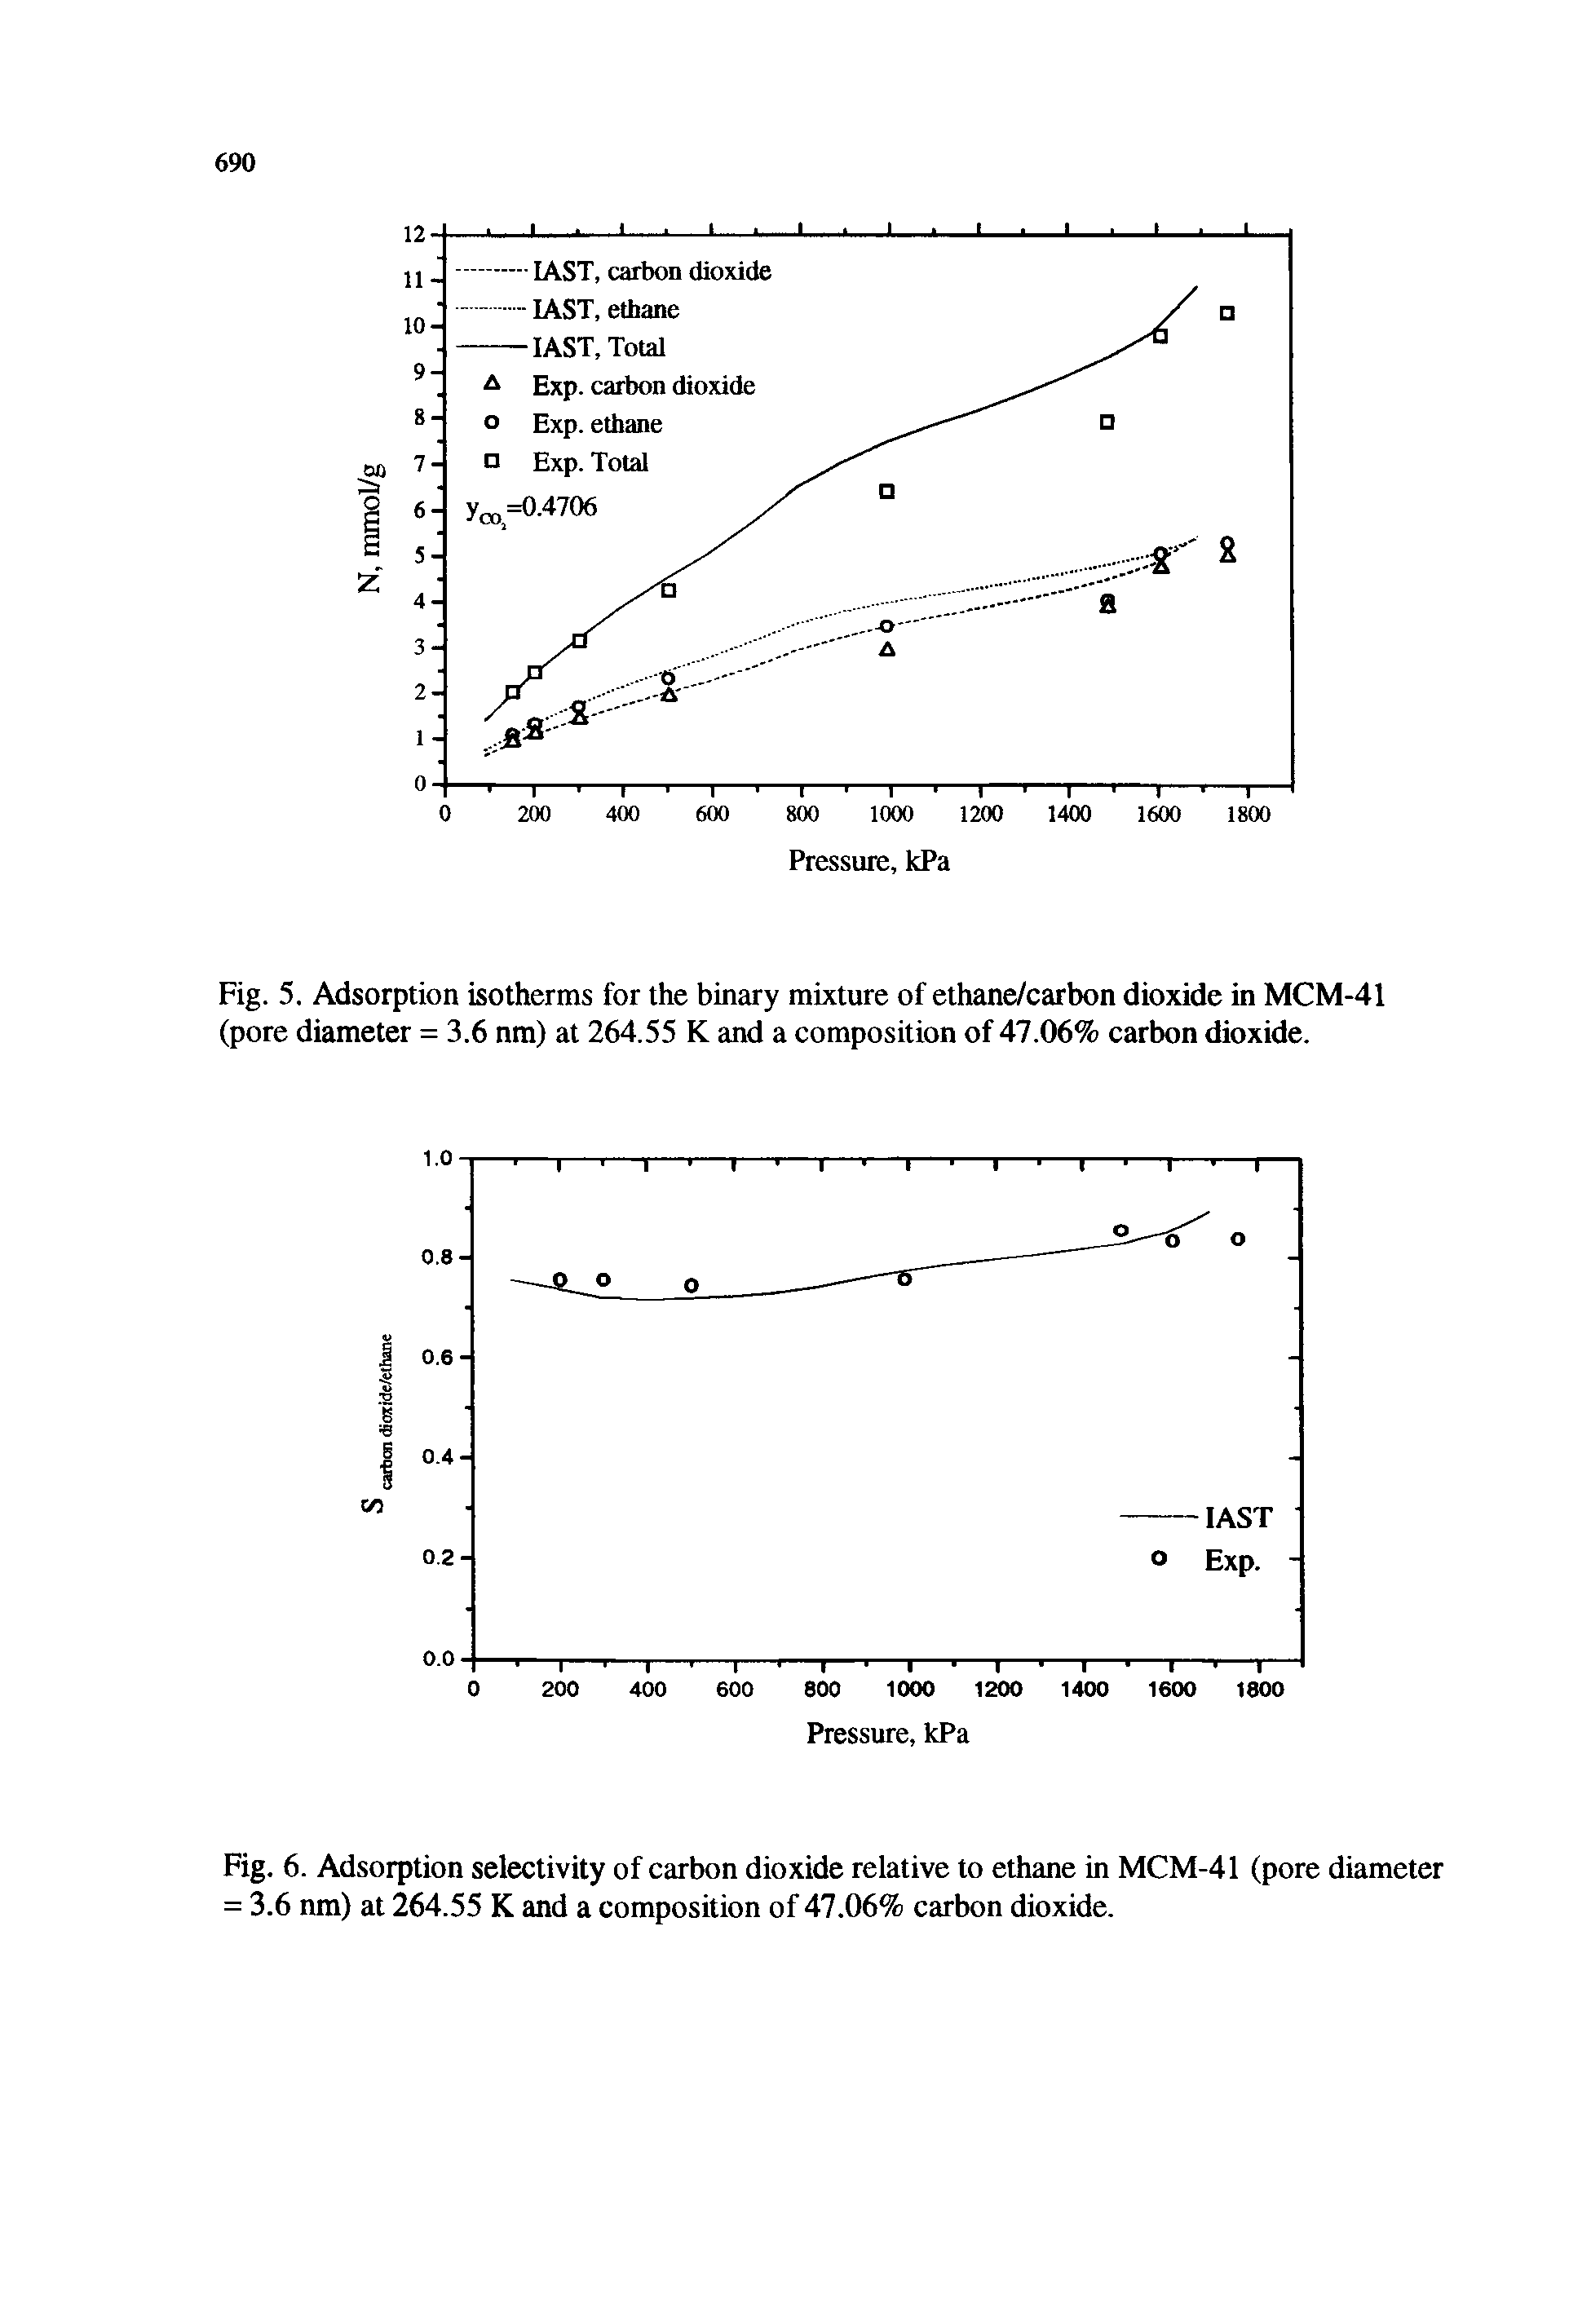 Fig. 5. Adsorption isotherms for the binary mixture of ethane/carbon dioxide in MCM-41 (pore diameter = 3.6 nm) at 264.55 K and a composition of 47.06% carbon dioxide.